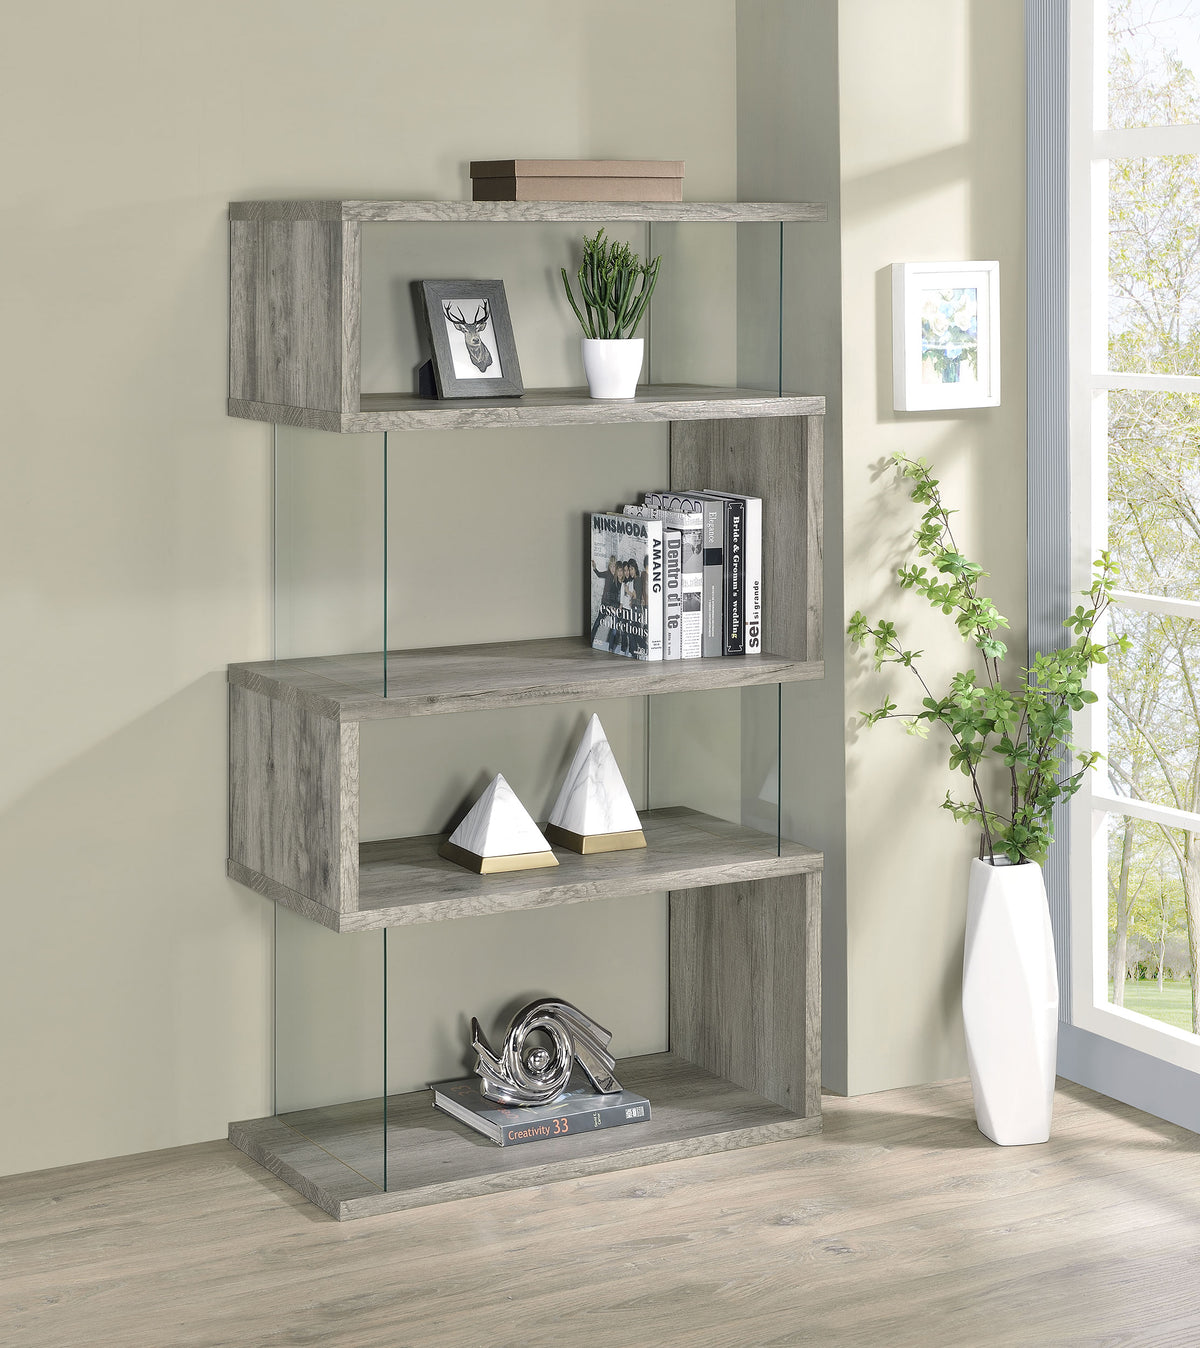 Emelle 4-shelf Bookcase with Glass Panels  Las Vegas Furniture Stores